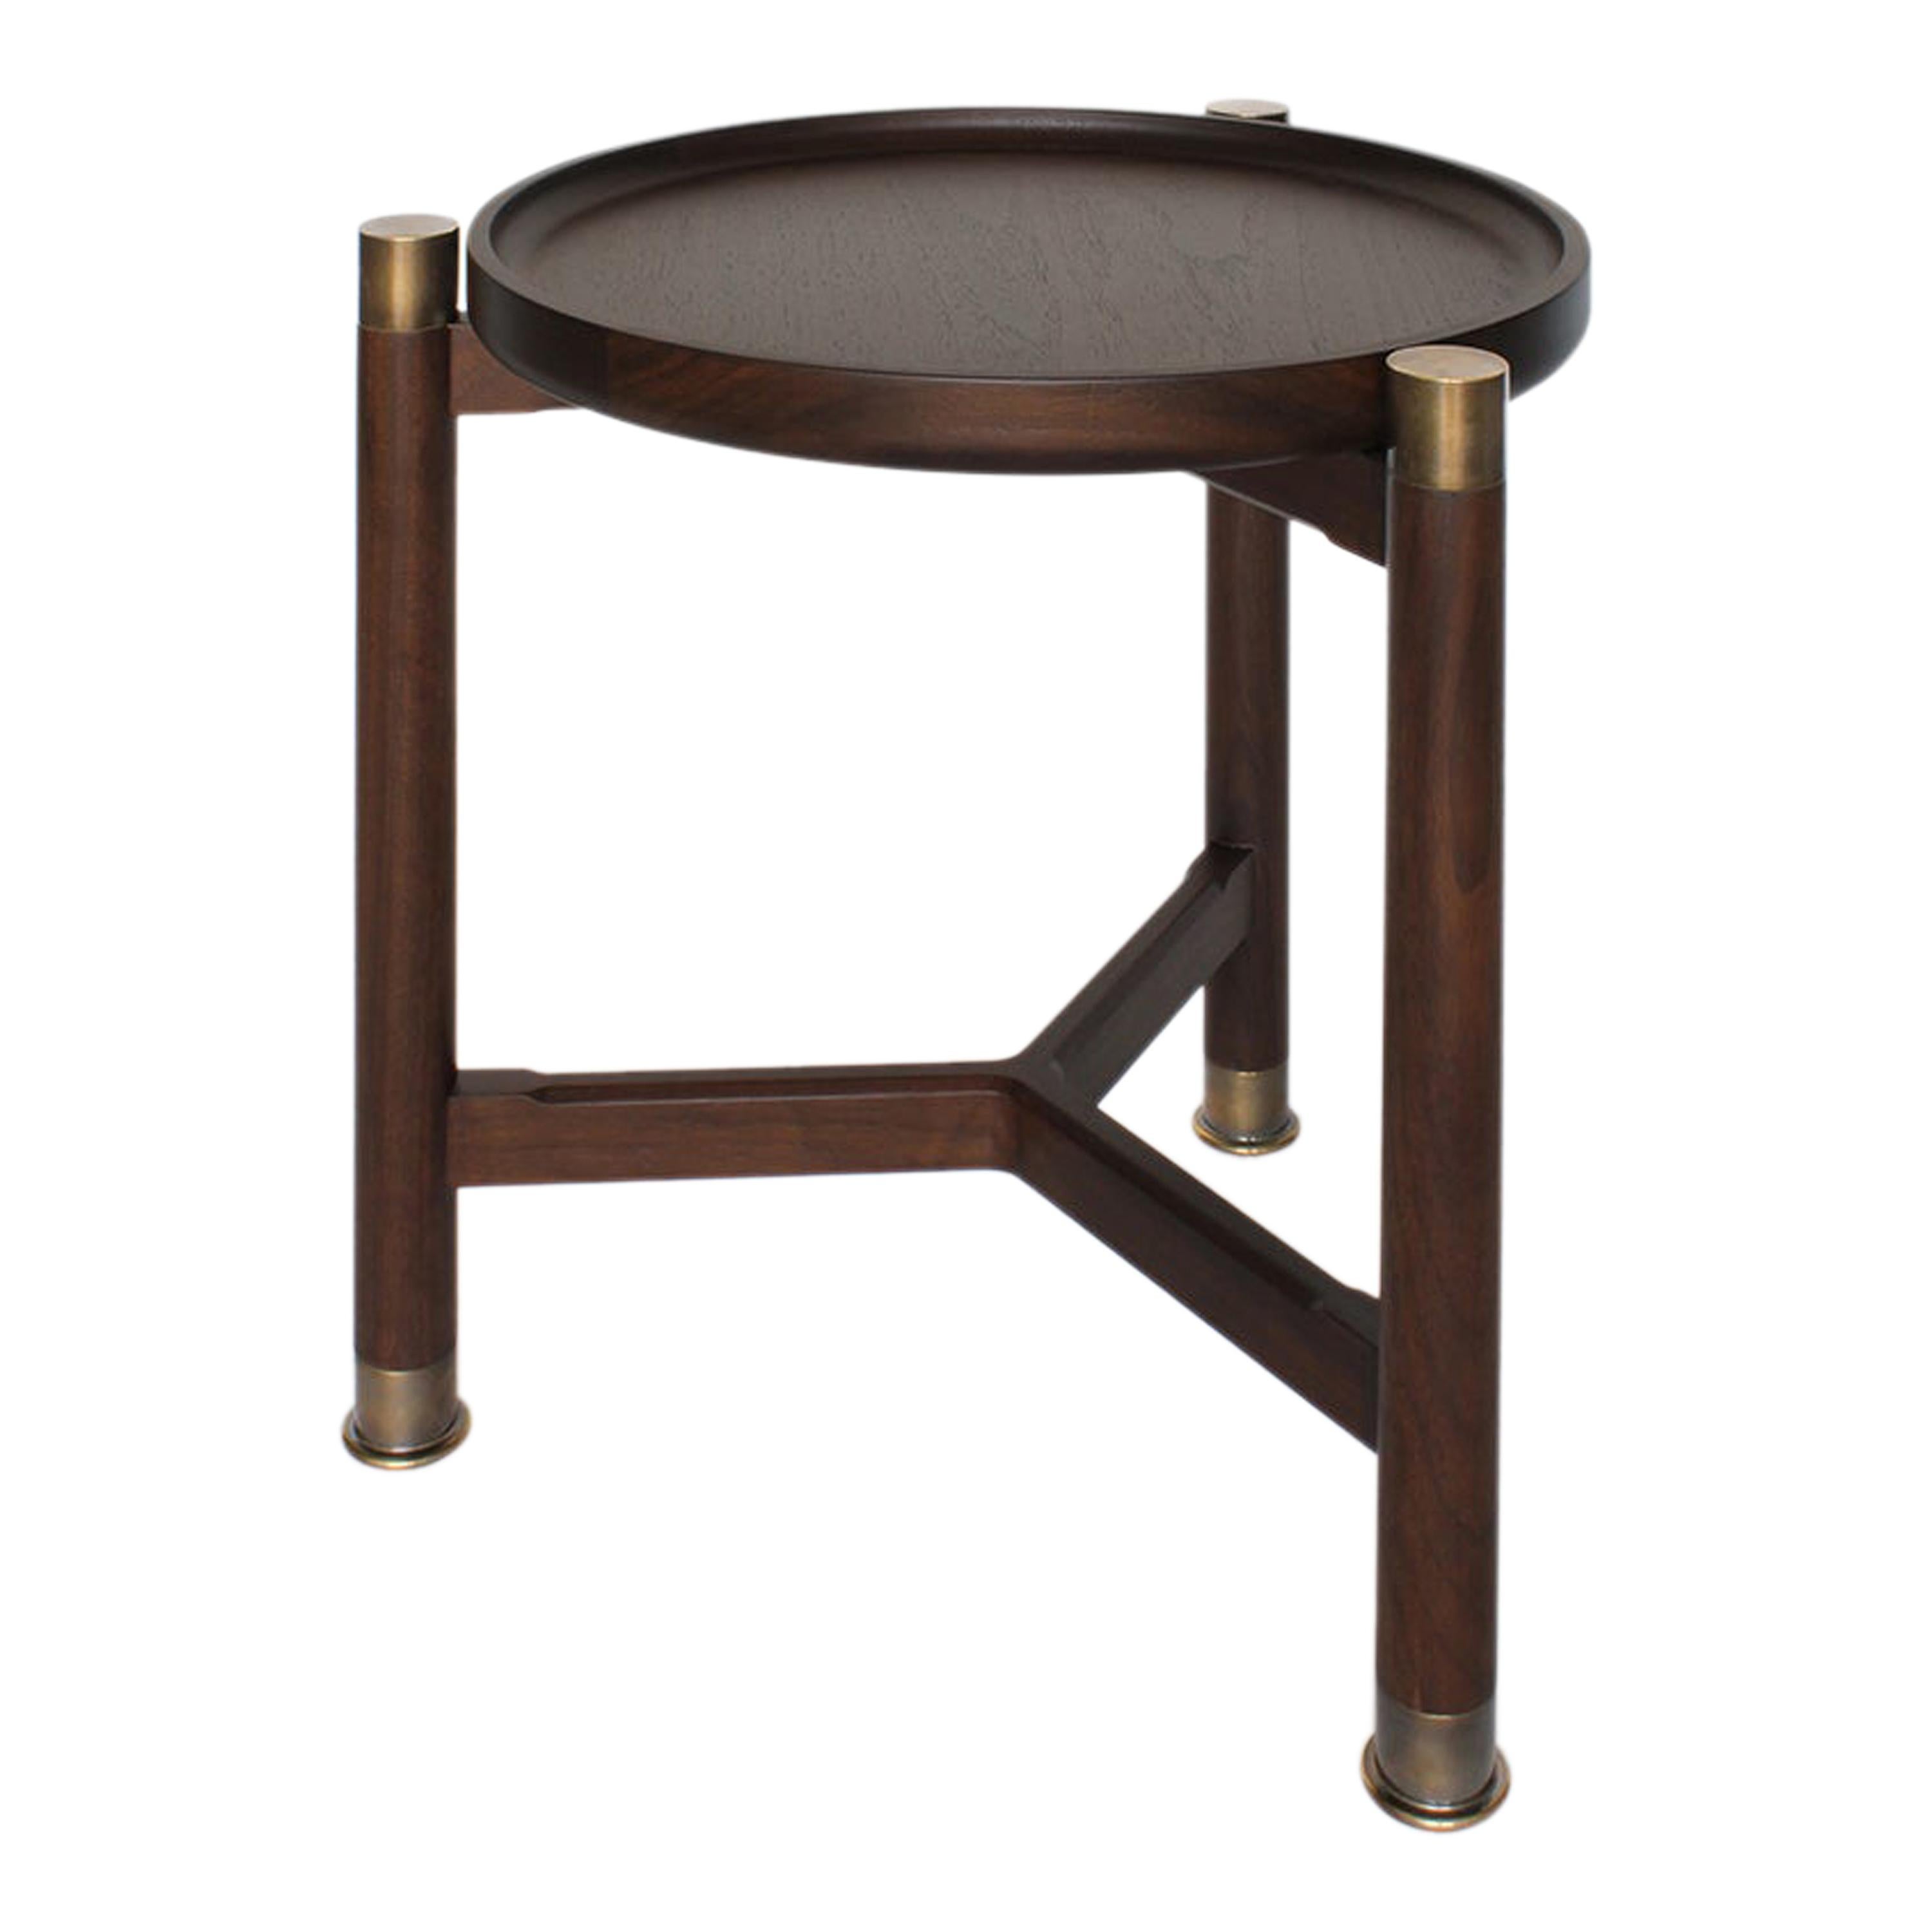 Otto Round Accent Table in Medium Walnut with Antique Brass Fittings For Sale